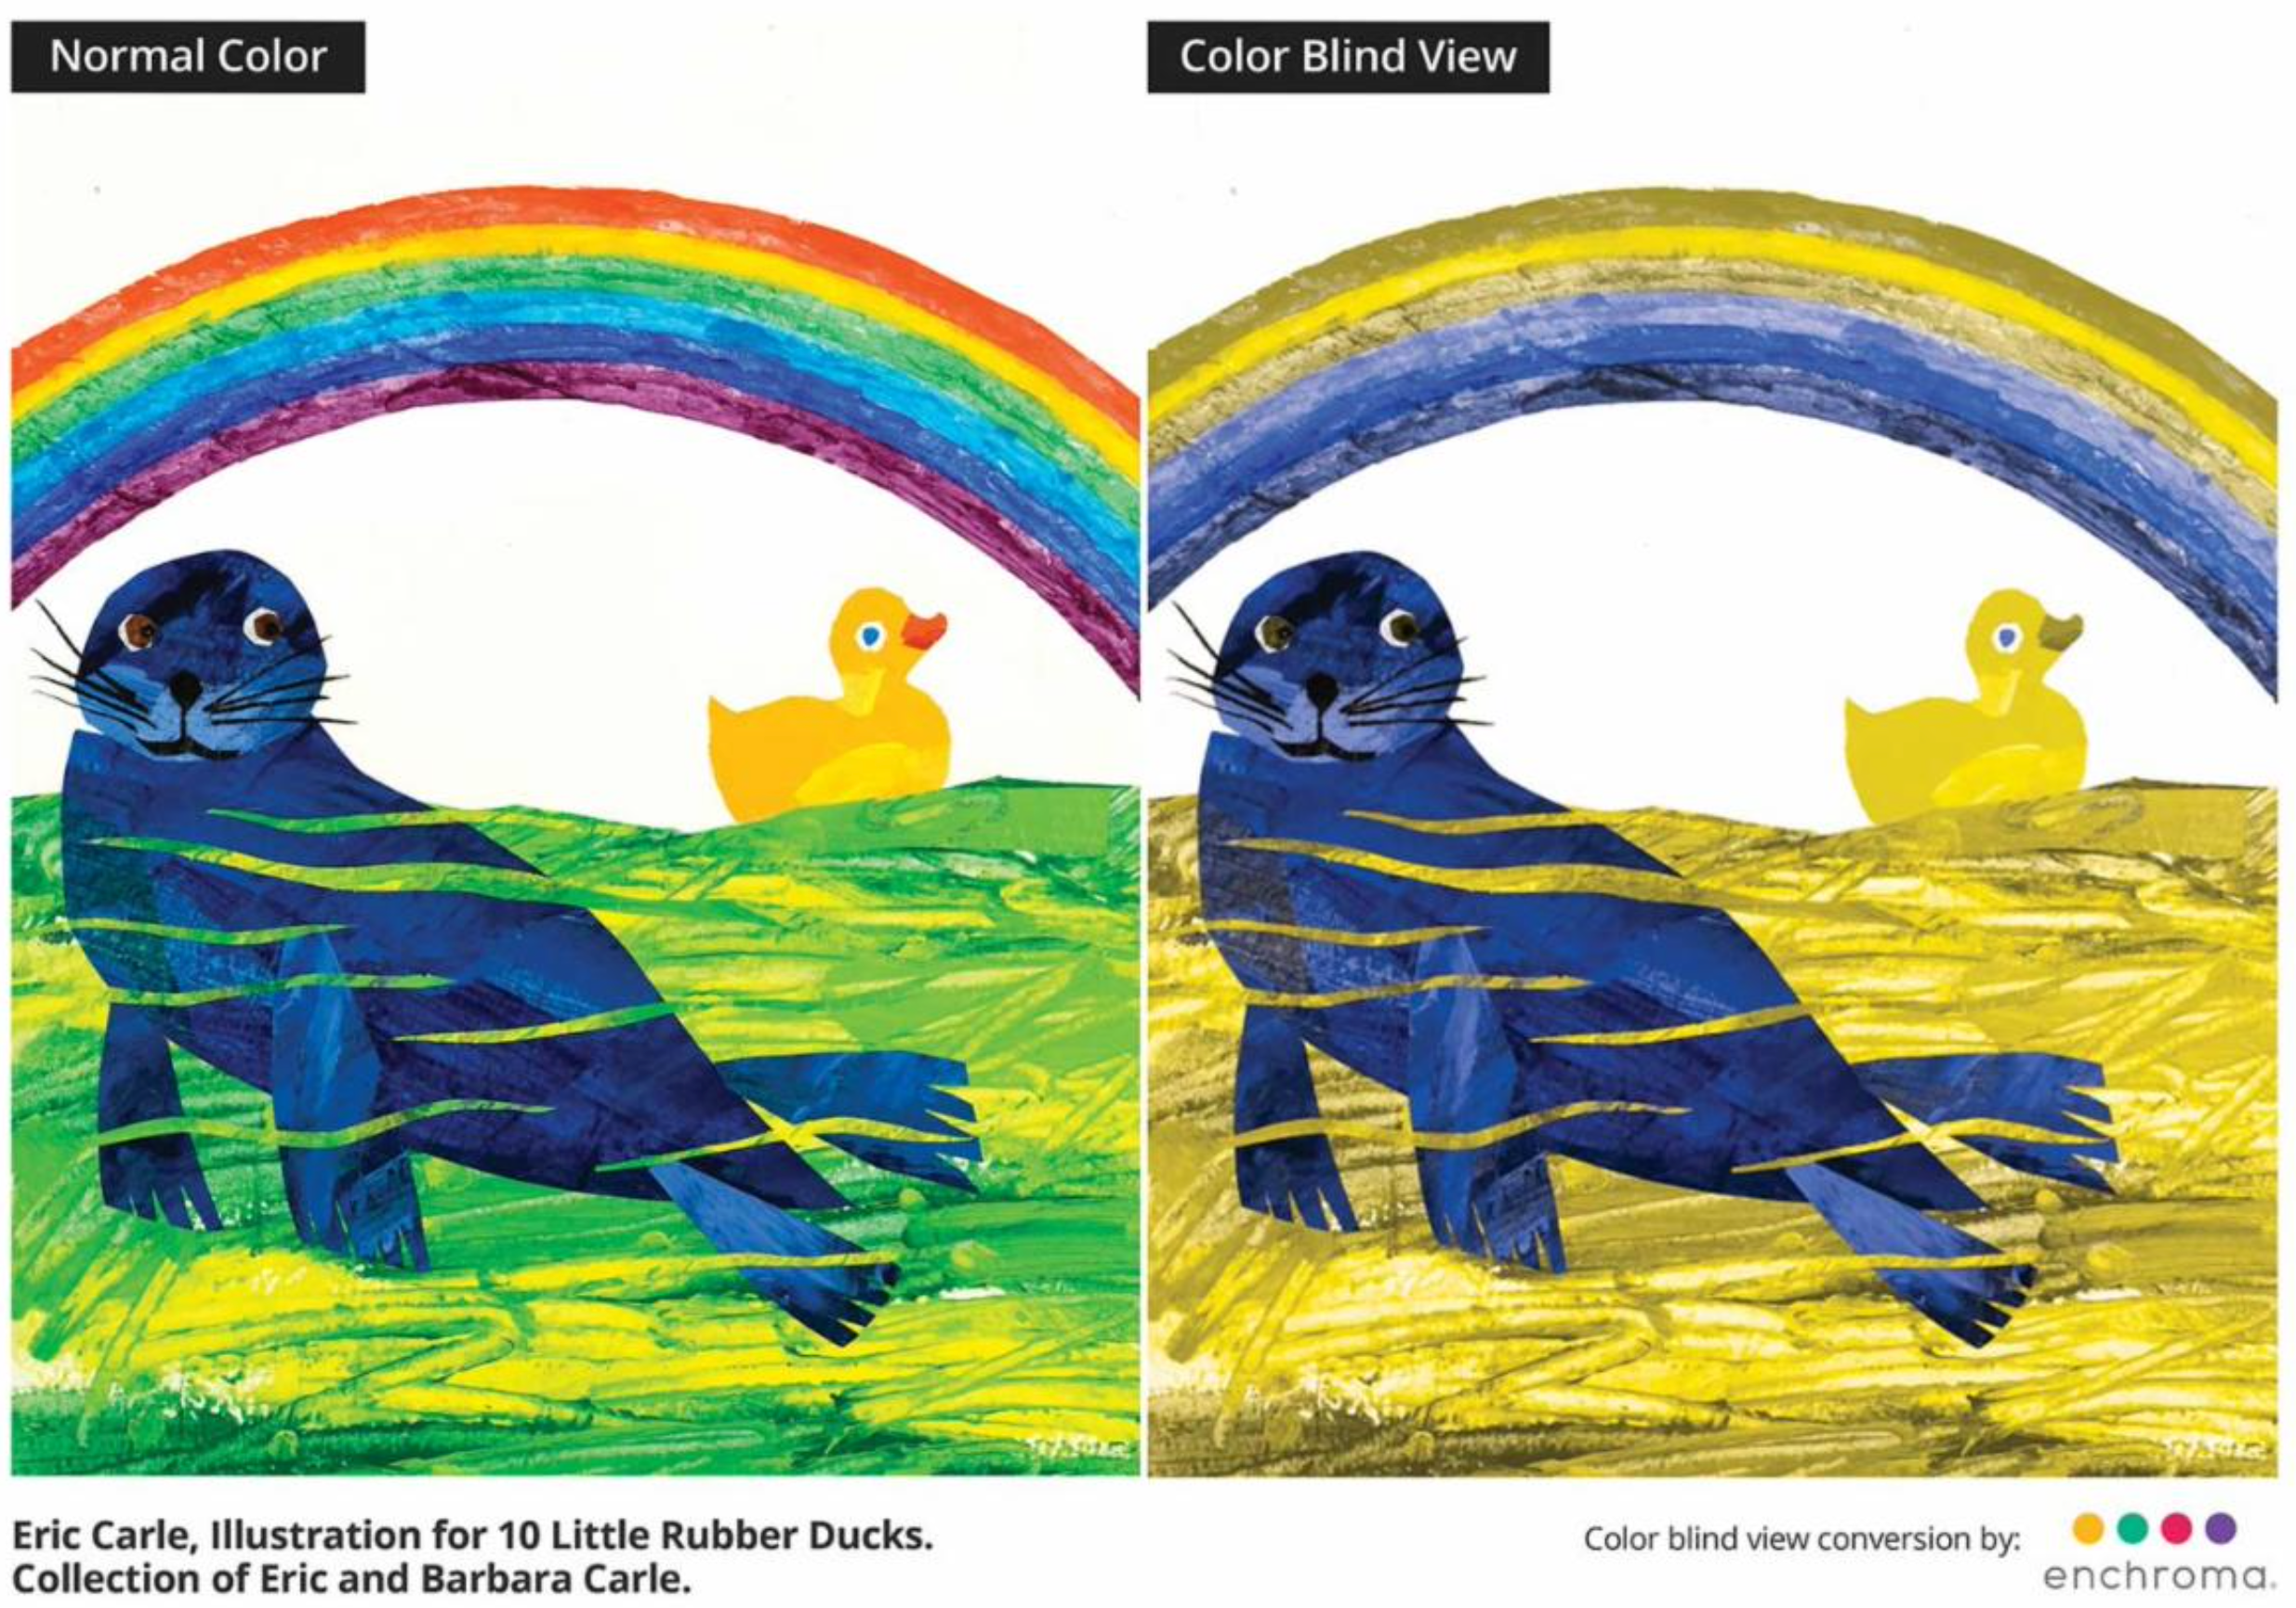 The Eric Carle Museum of Picture Book Art Teams with EnChroma to Enhan